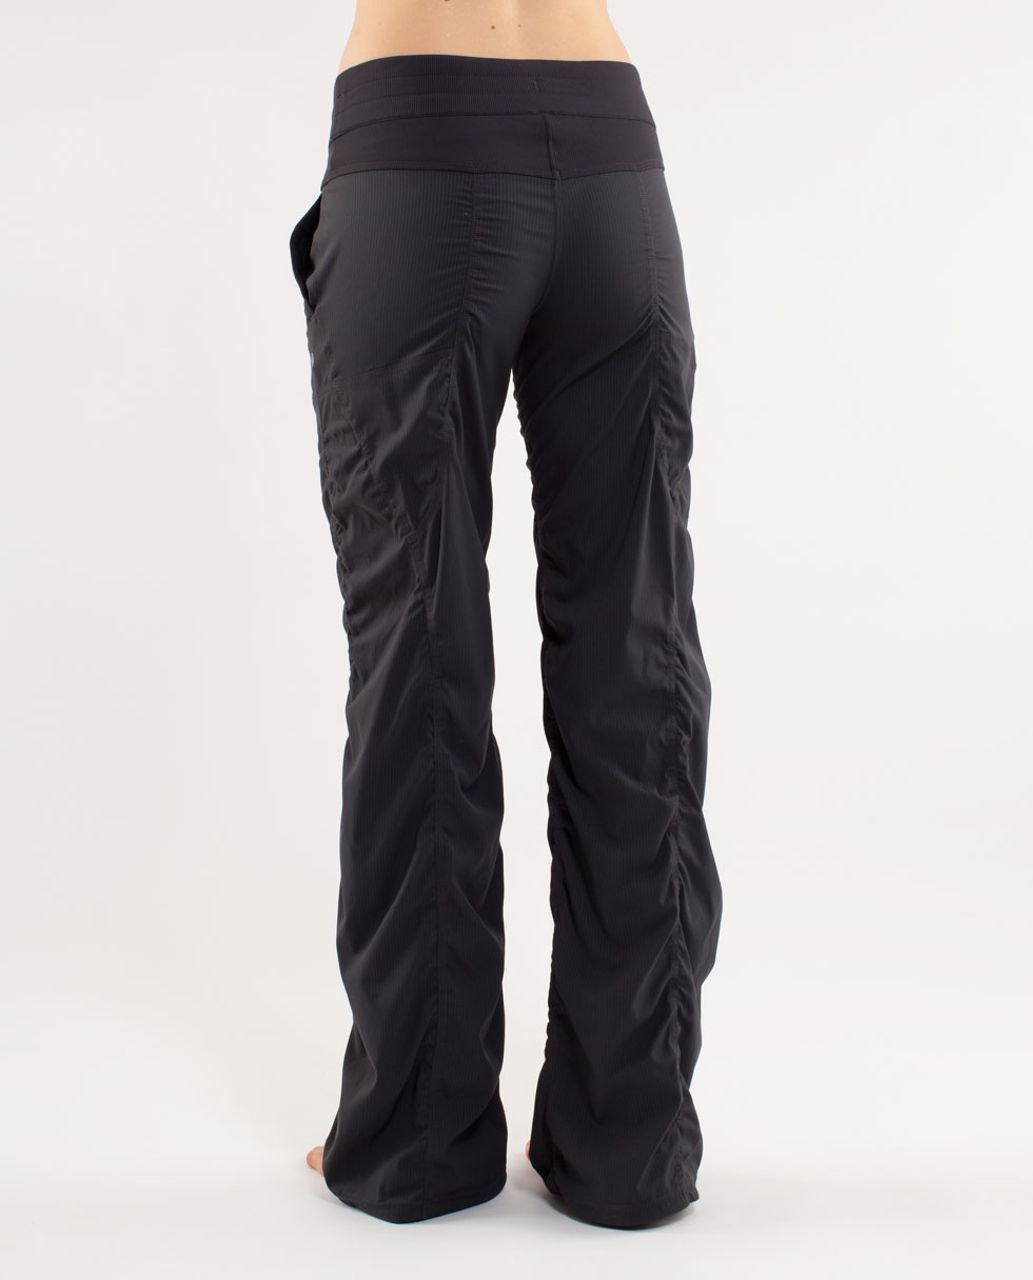 Find more Lululemon Studio Pants Ii Lined for sale at up to 90% off